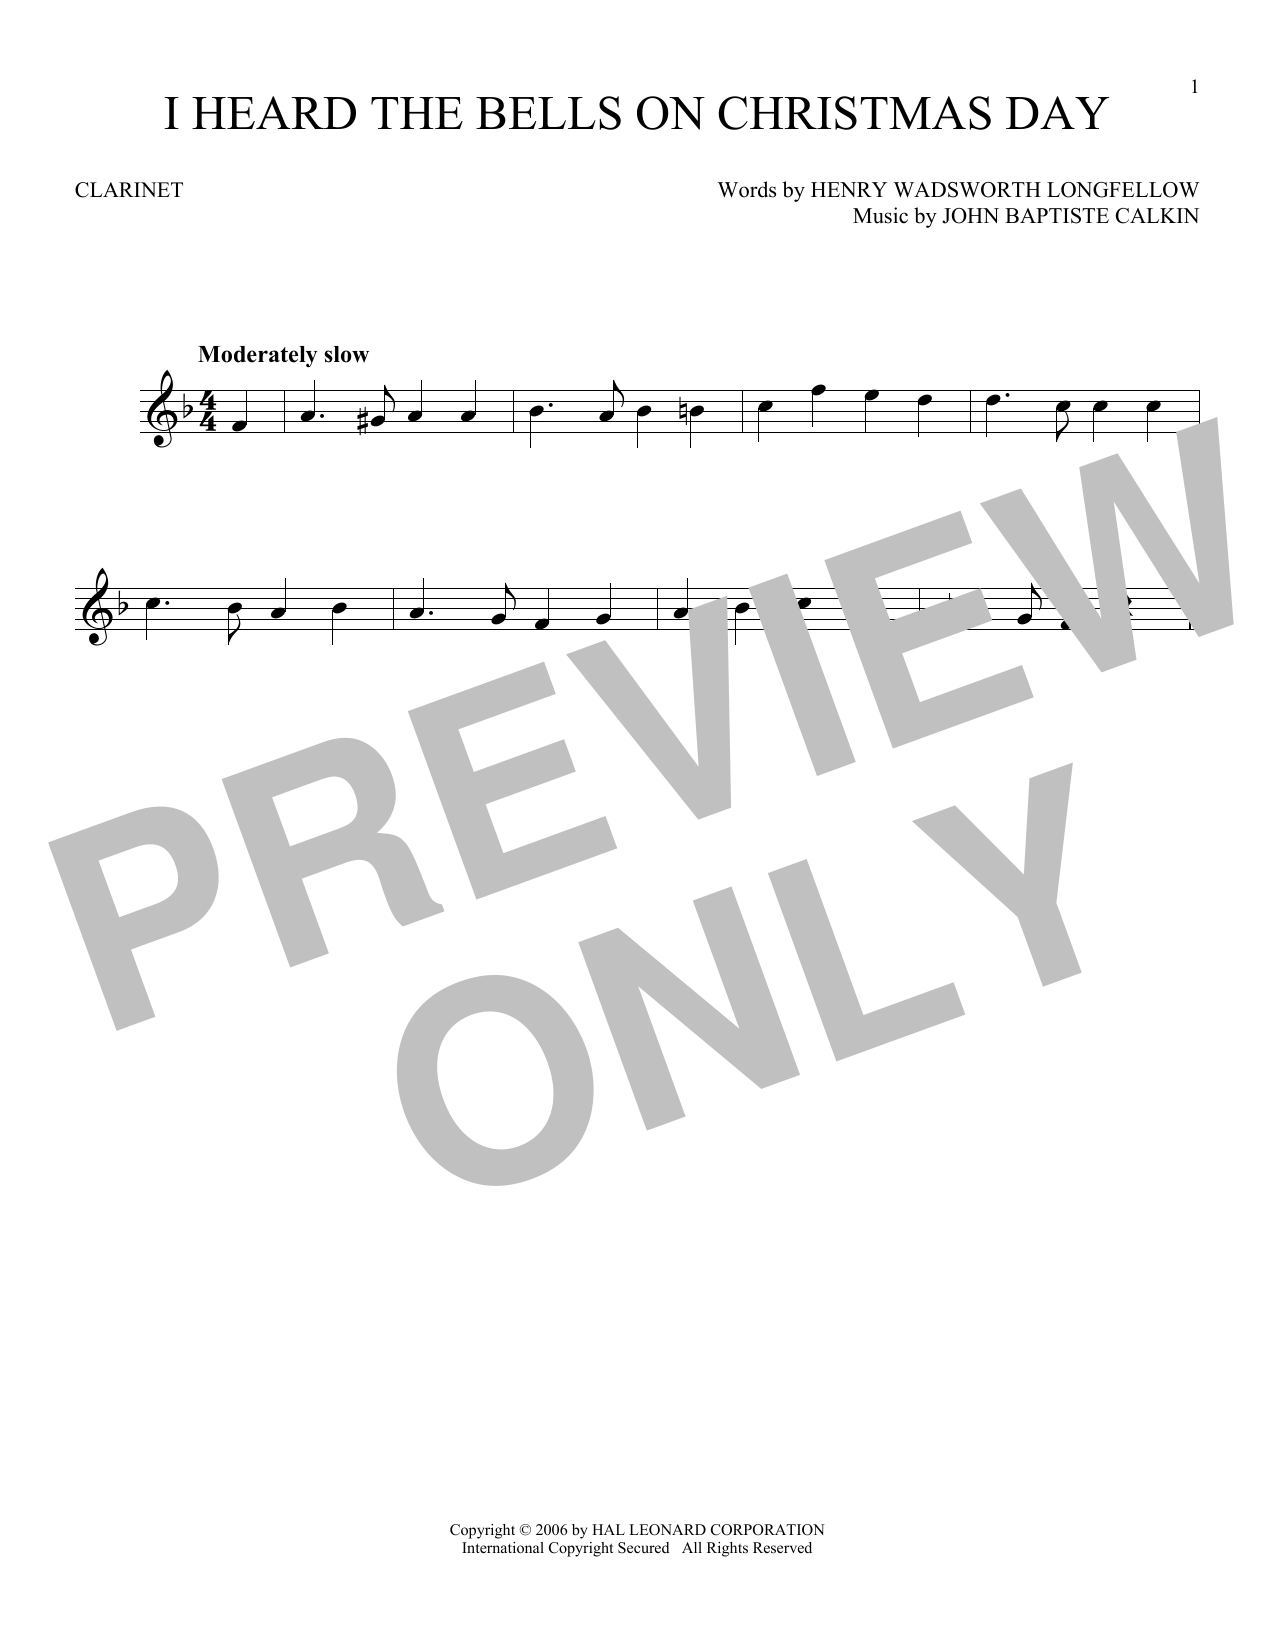 Download Johnny Marks I Heard The Bells On Christmas Day Sheet Music